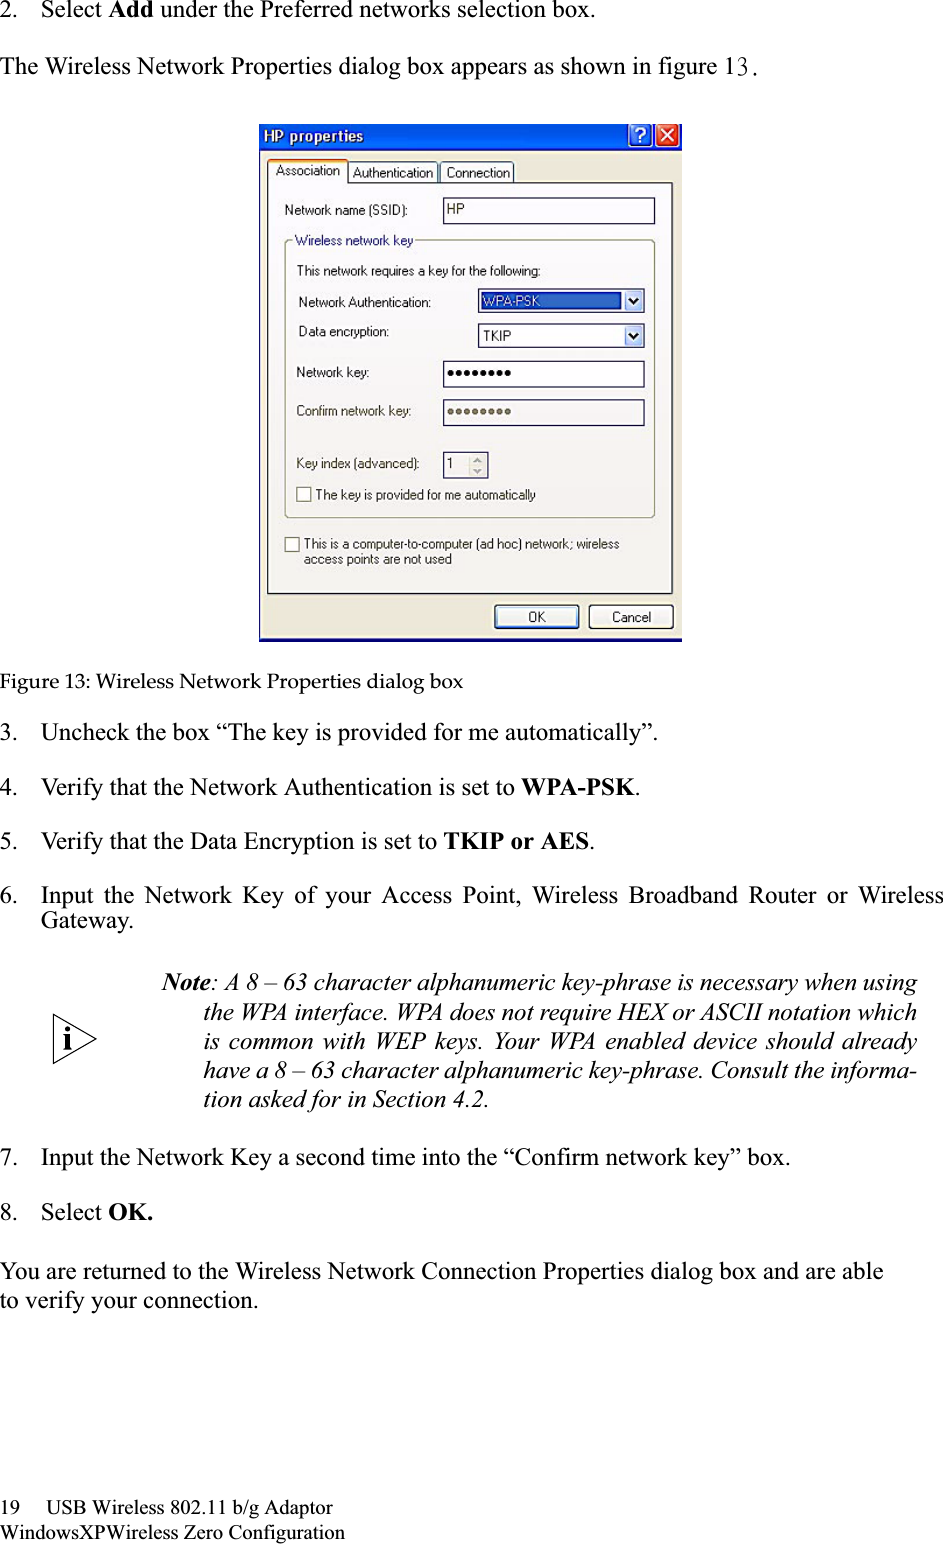 19     USB Wireless 802.11 b/g AdaptorWindowsXPWireless Zero Configuration2. Select Add under the Preferred networks selection box. The Wireless Network Properties dialog box appears as shown in figure 14/Figureȱ13:ȱWirelessȱNetworkȱPropertiesȱdialogȱbox3. Uncheck the box “The key is provided for me automatically”.4. Verify that the Network Authentication is set to WPA-PSK.5. Verify that the Data Encryption is set to TKIP or AES.6. Input the Network Key of your Access Point, Wireless Broadband Router or WirelessGateway.7. Input the Network Key a second time into the “Confirm network key” box.8. Select OK.You are returned to the Wireless Network Connection Properties dialog box and are ableto verify your connection.Note: A 8 – 63 character alphanumeric key-phrase is necessary when usingthe WPA interface. WPA does not require HEX or ASCII notation whichis common with WEP keys. Your WPA enabled device should alreadyhave a 8 – 63 character alphanumeric key-phrase. Consult the informa-tion asked for in Section 4.2.